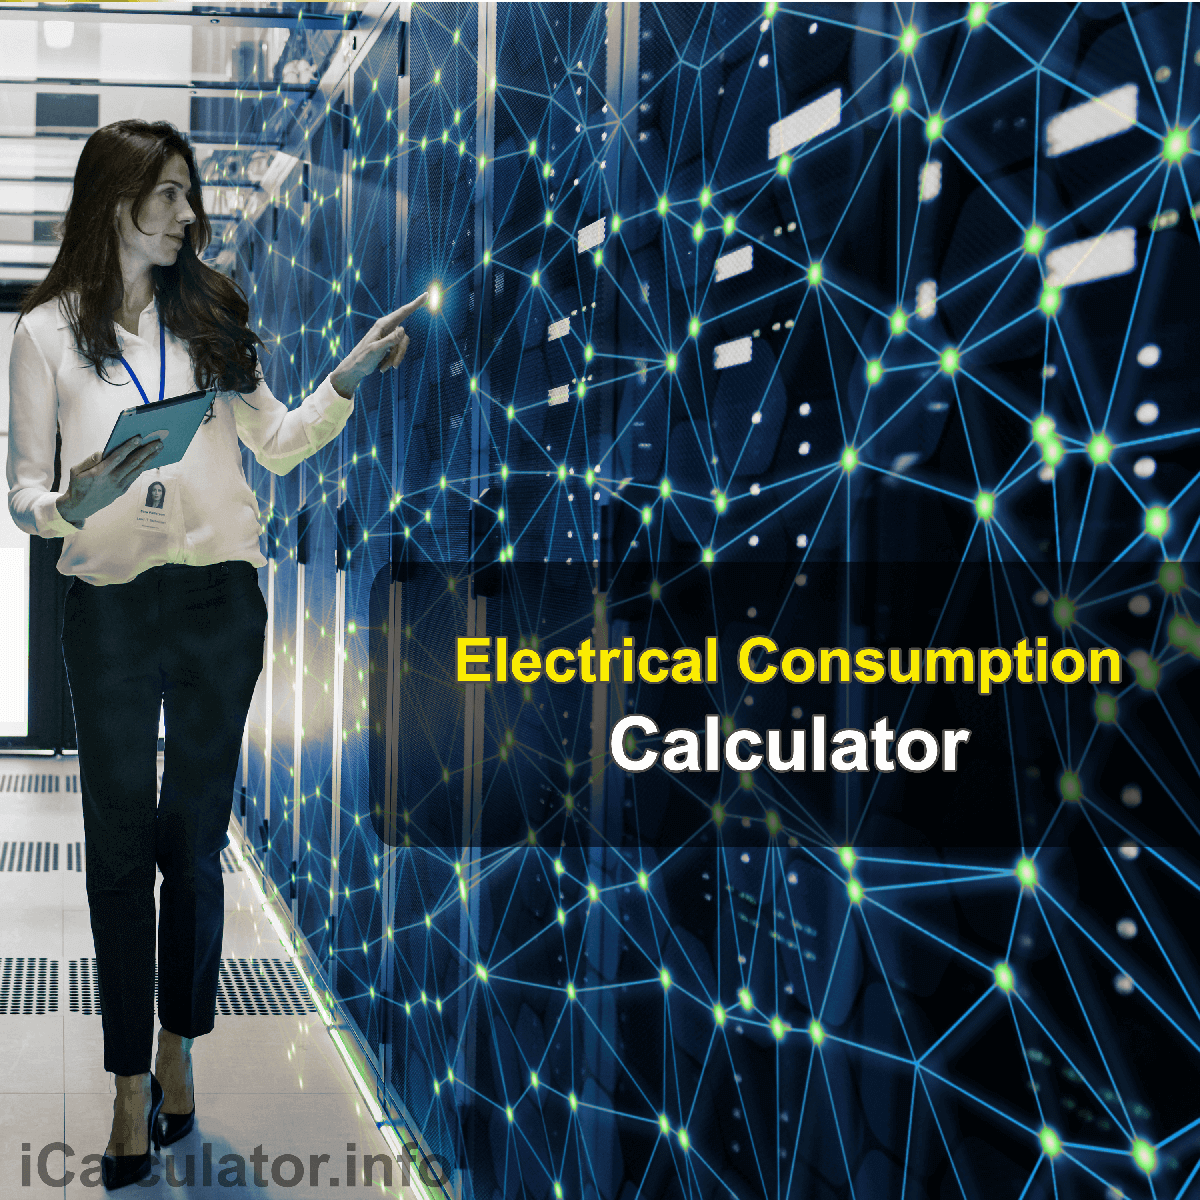 Household Electrical ConsumptionCalculator. This image provides details of how to calculate your household energy consumption using a good calculator, a pen and paper. By using the electrical energy consumption formula, the Household Electrical Consumption Calculator provides a comparison of the energy used by each of your appliances in your houselh along with the total annua costs to help you reduce your energy bills.